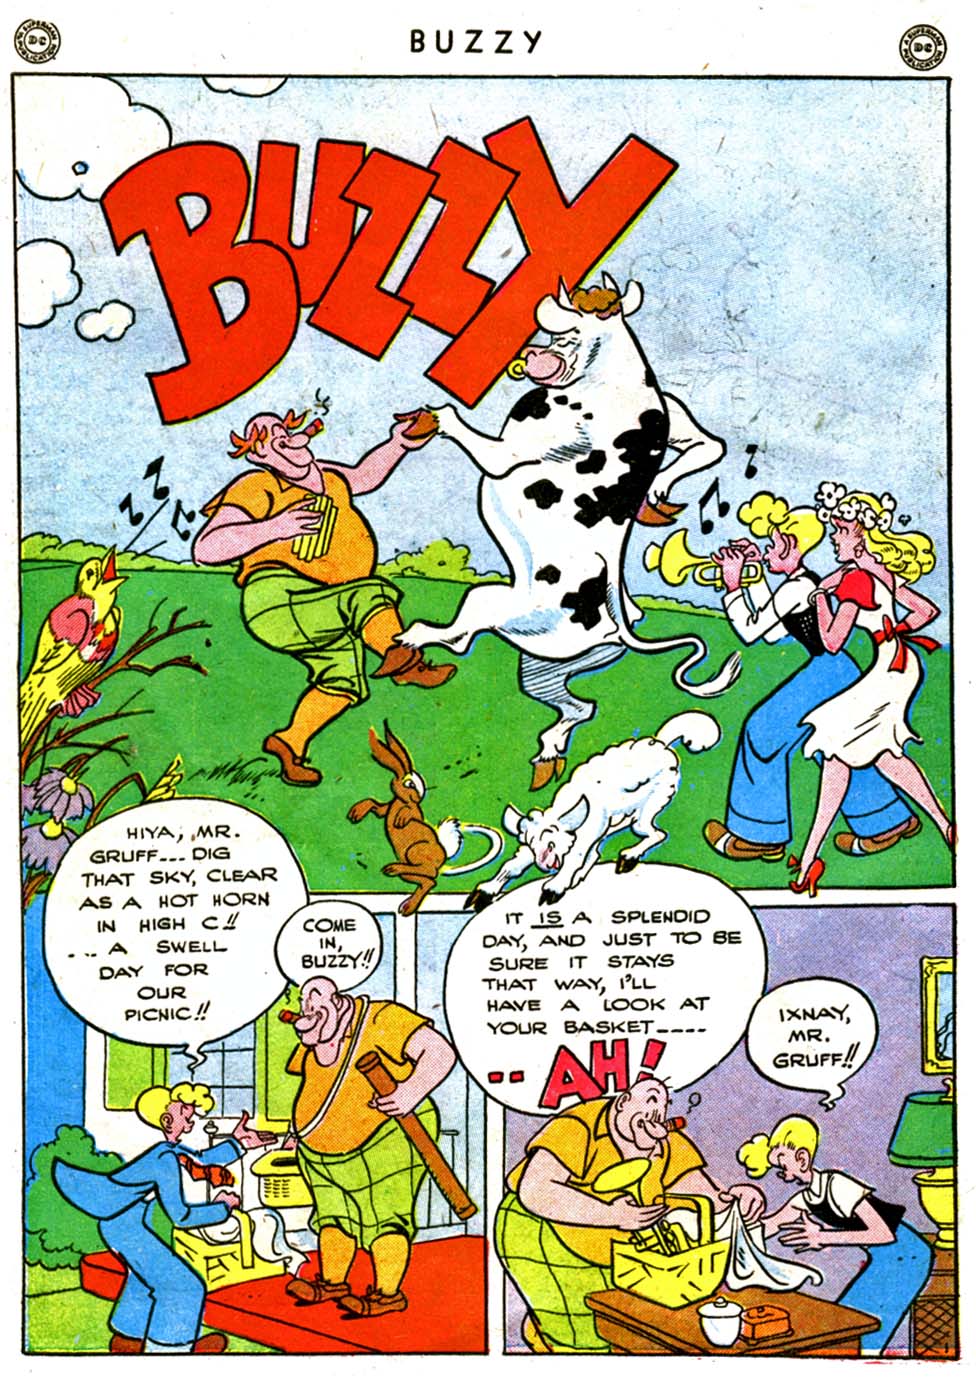 Read online Buzzy comic -  Issue #3 - 44